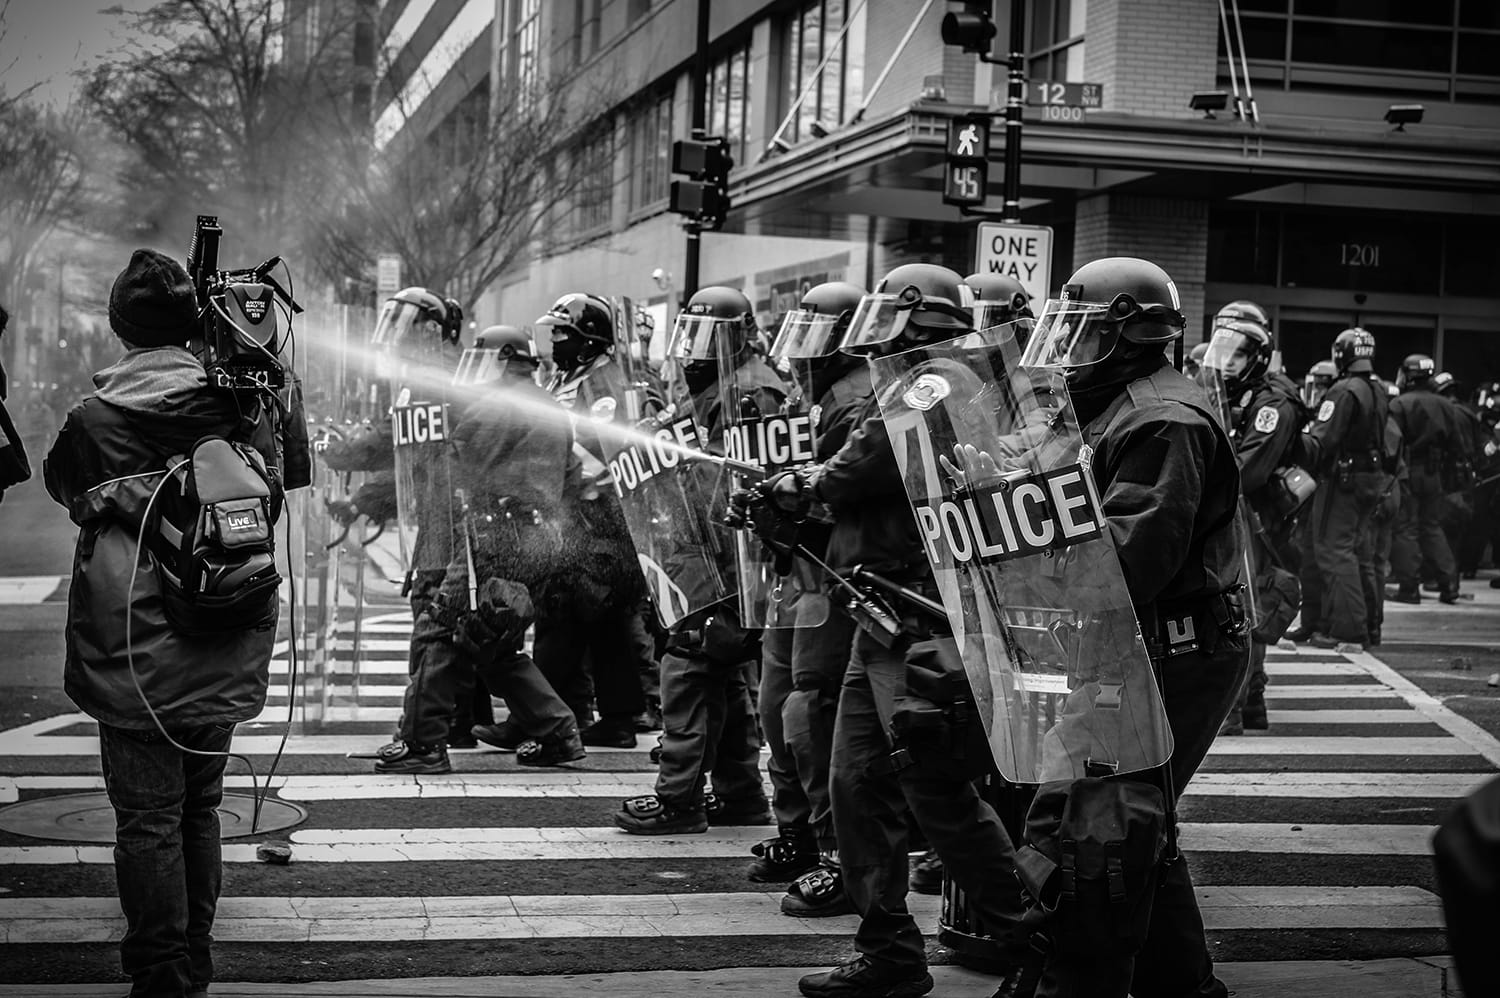 Protest Photography 101